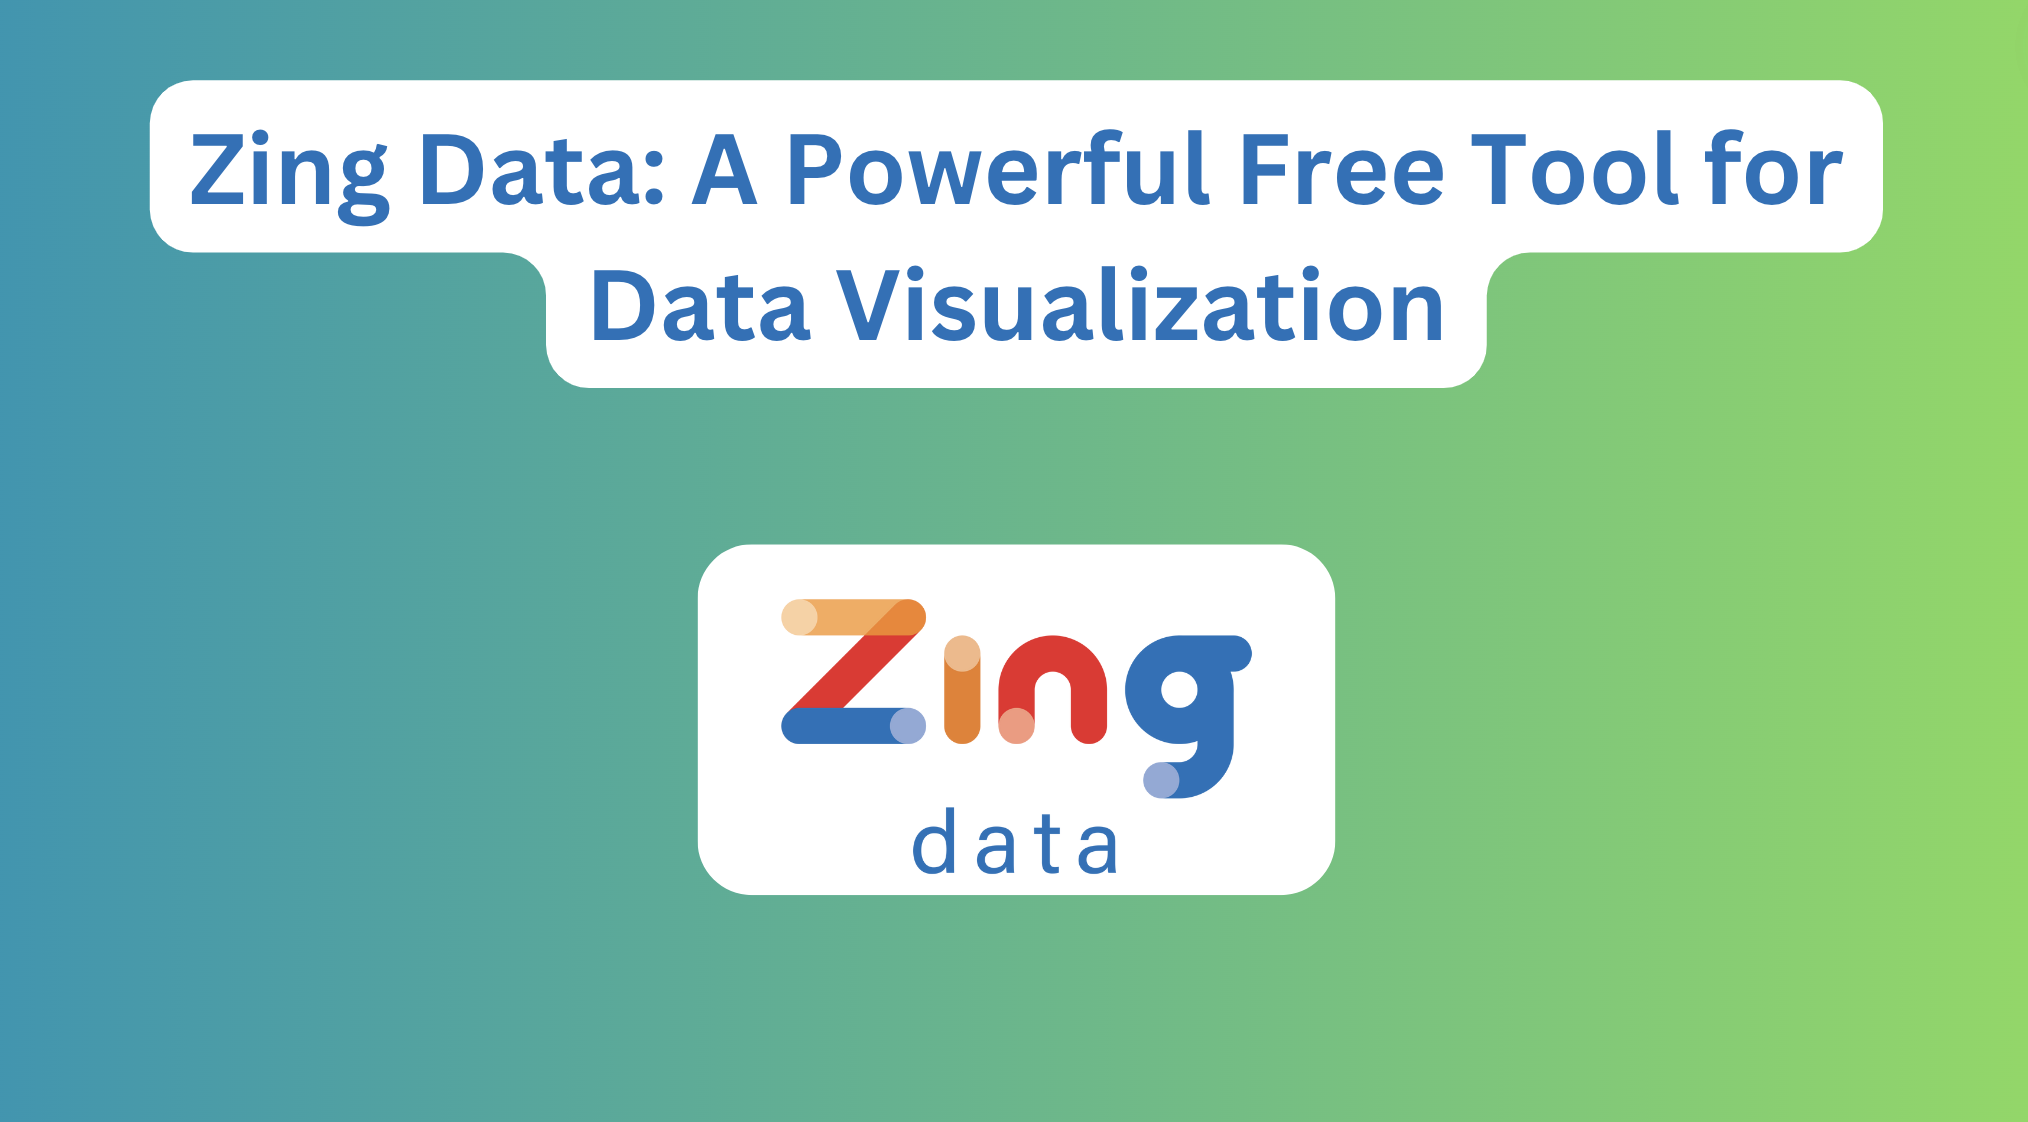 Zing Data: A Powerful Free Tool for Data Visualization